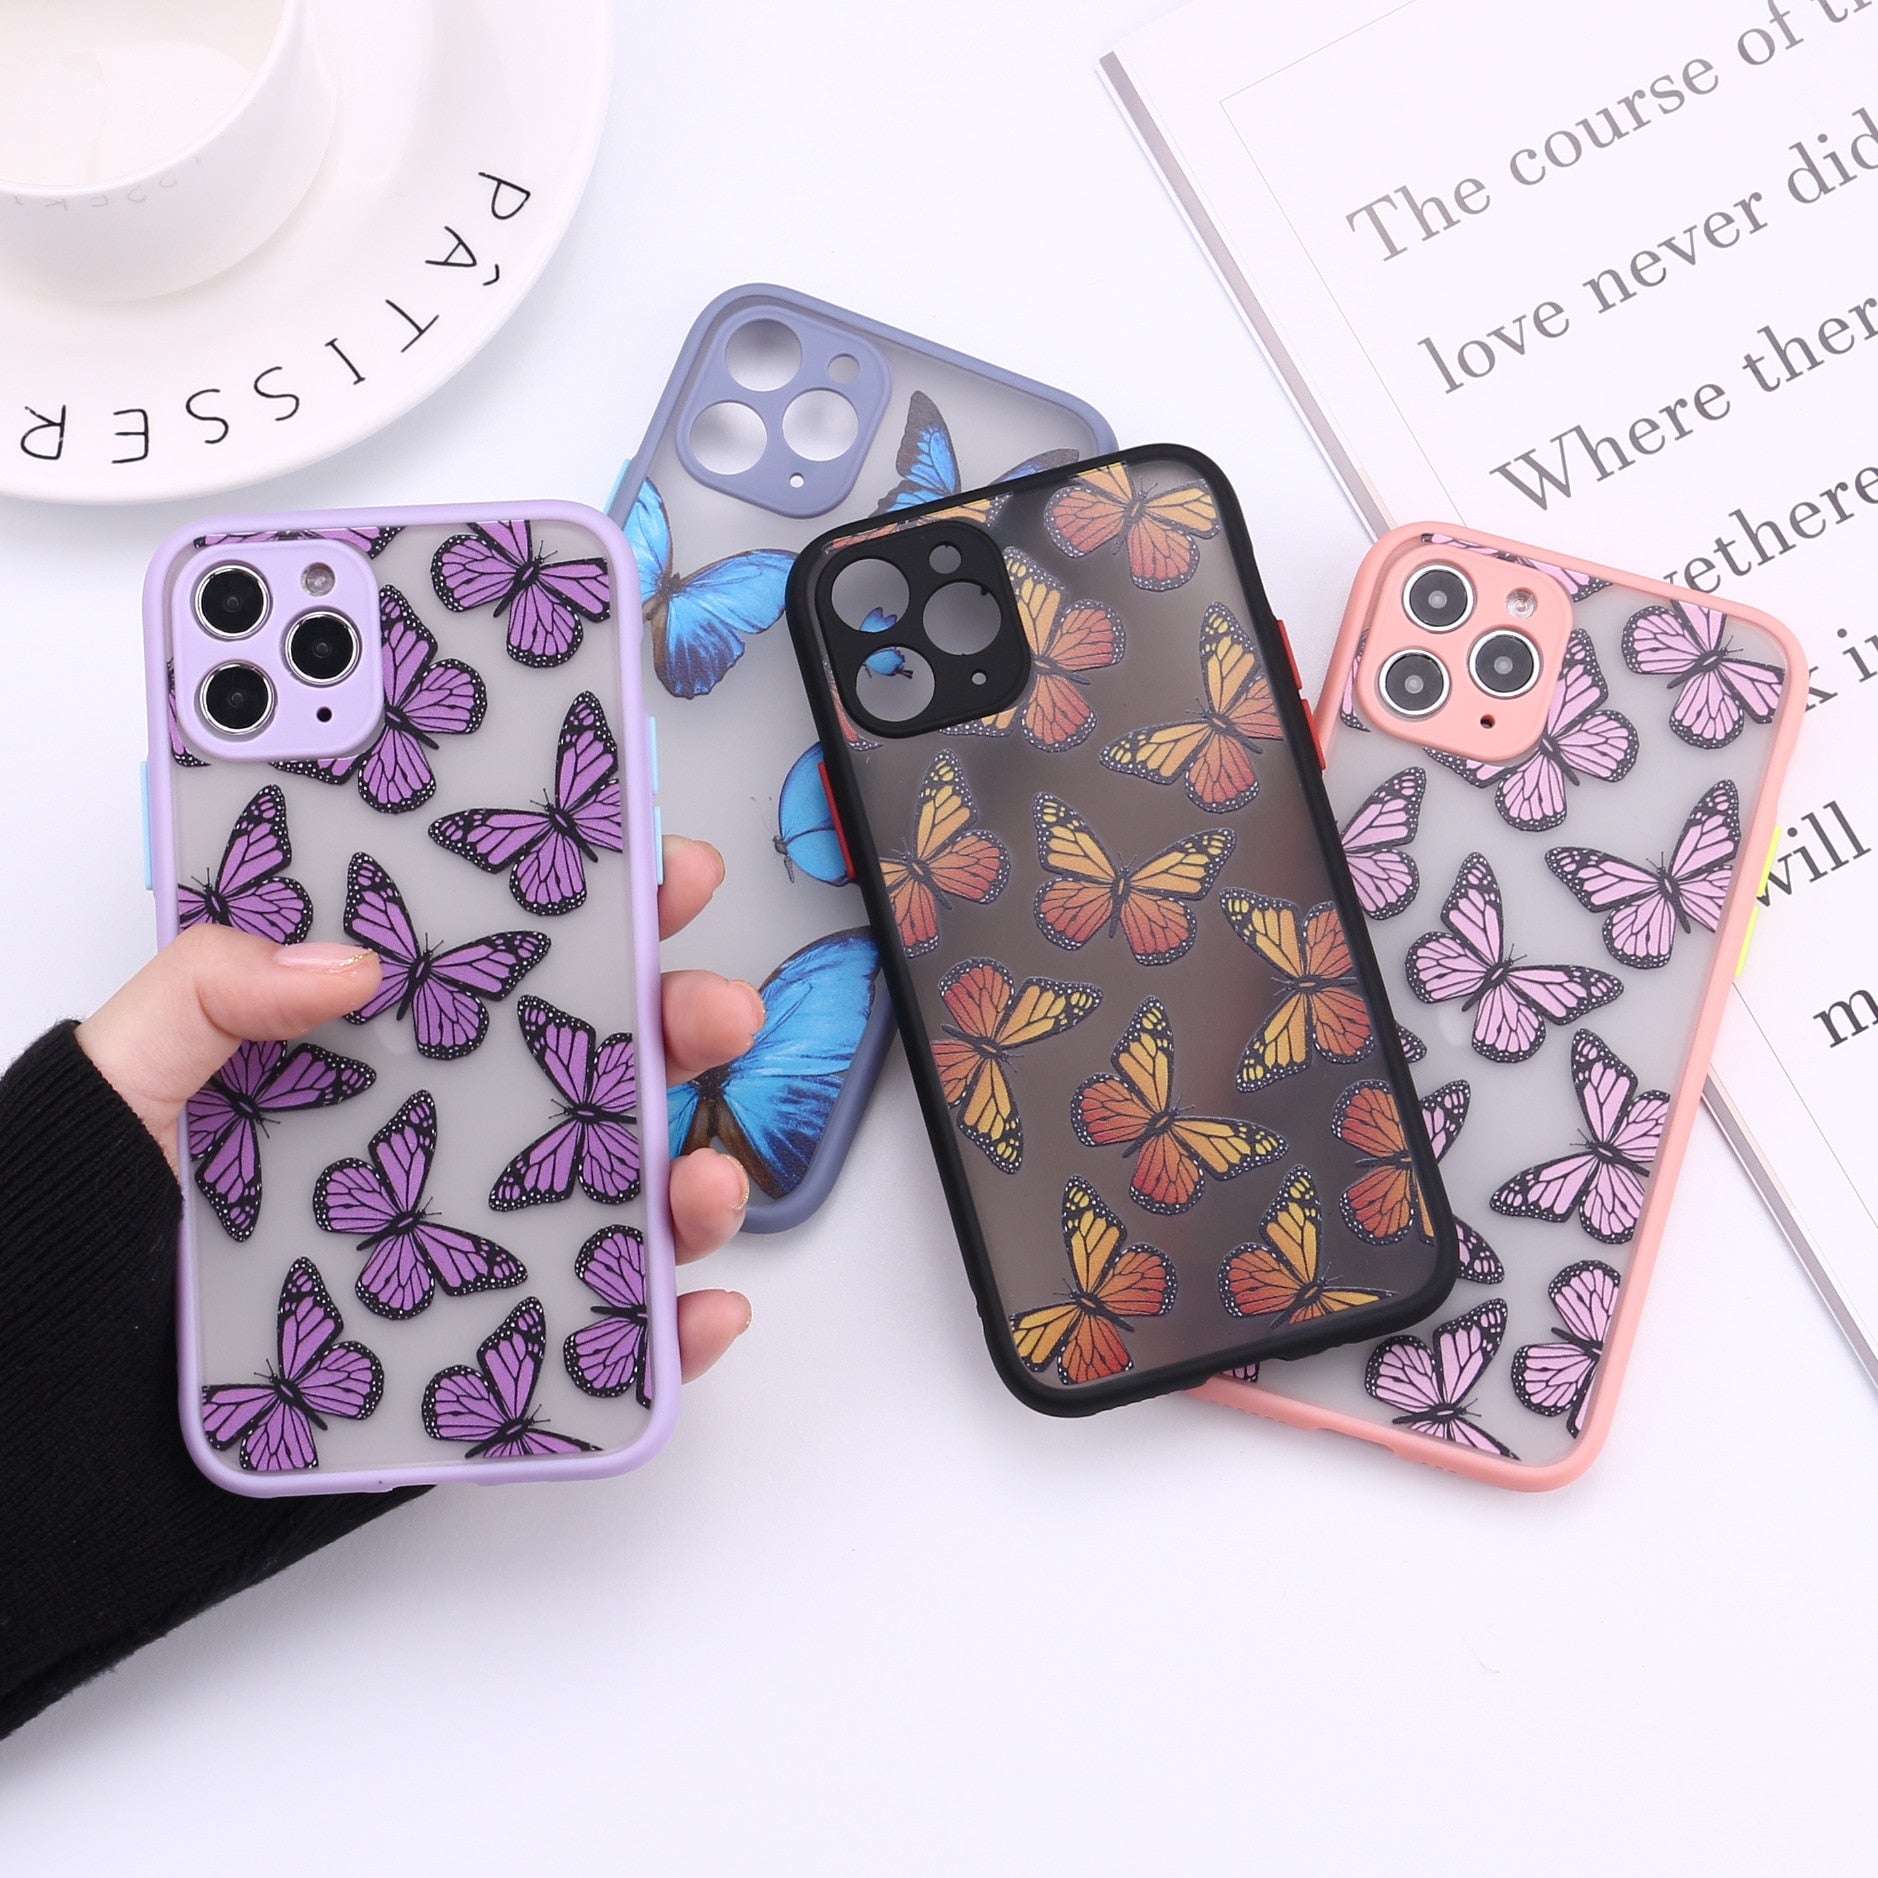 Cute 3D Relif Butterfly phone case for iphone 11 Pro Max XR XS MAX case silicone for iphone 7 8 Plus 12 pro max cover Christmas